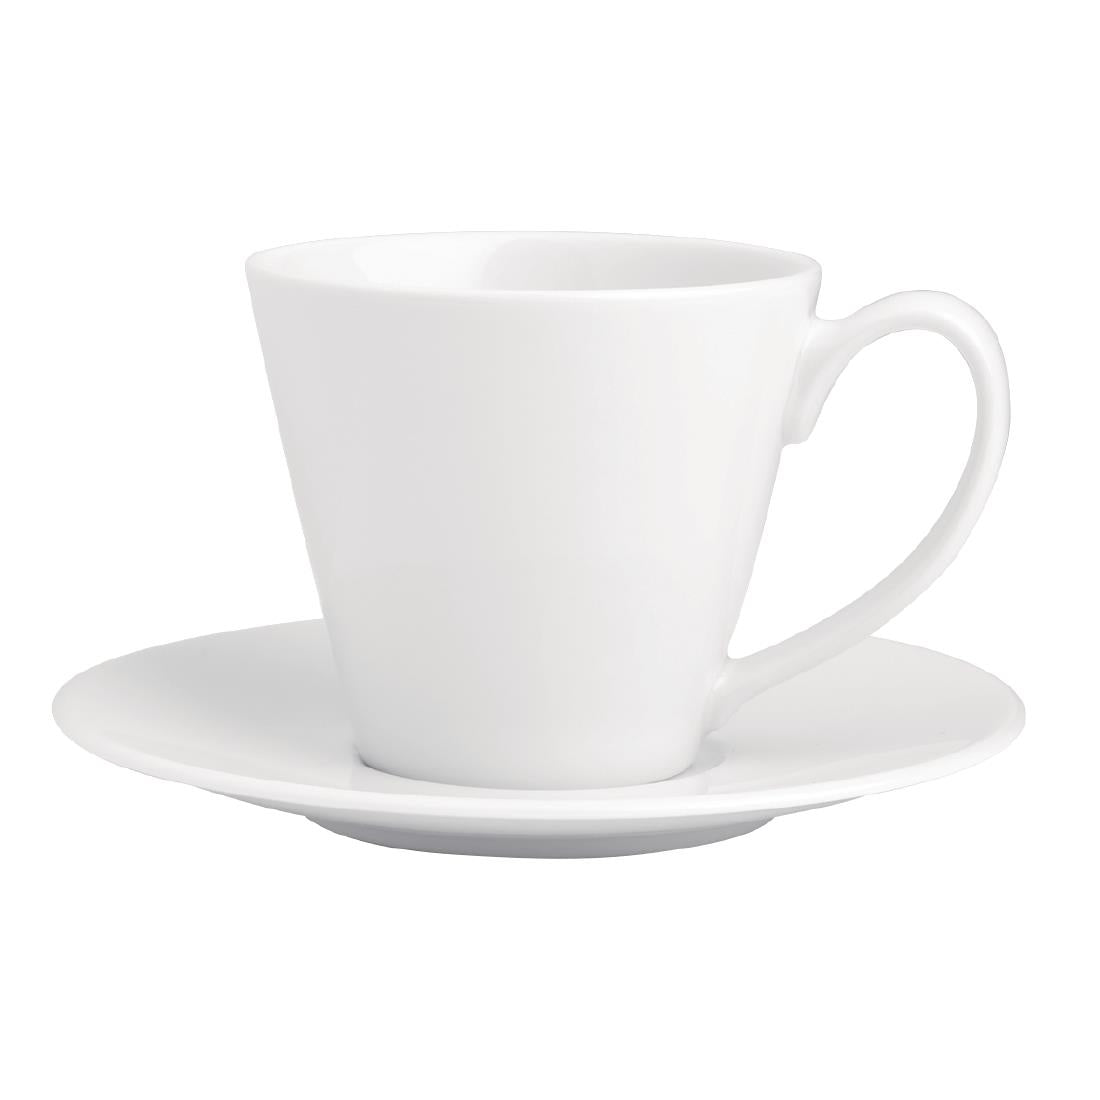 Royal Porcelain Classic White Tea Cup 210ml (Pack of 12)